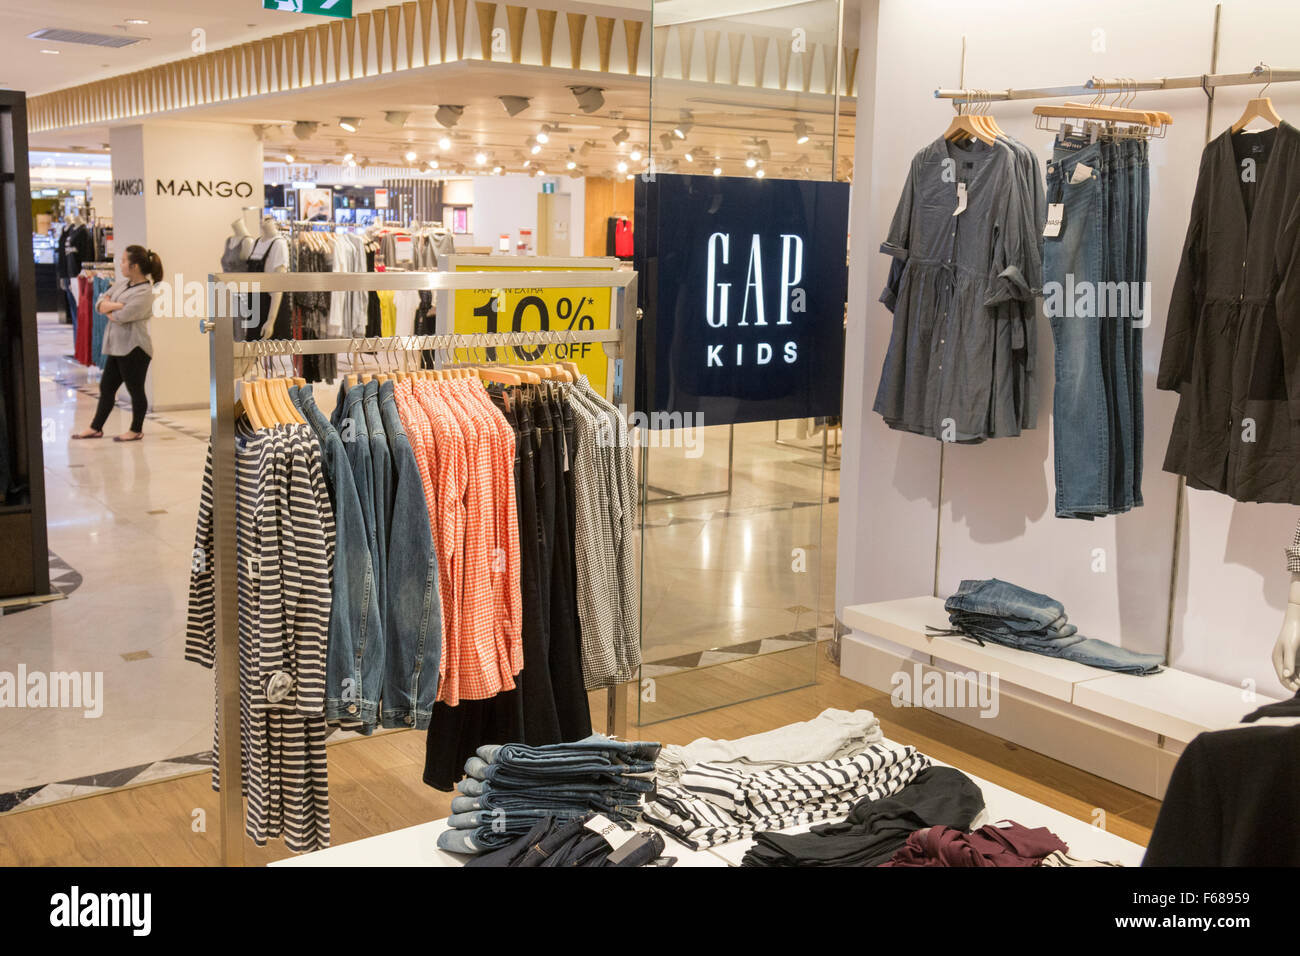 Gap Kids Store High Resolution Stock Photography and Images - Alamy